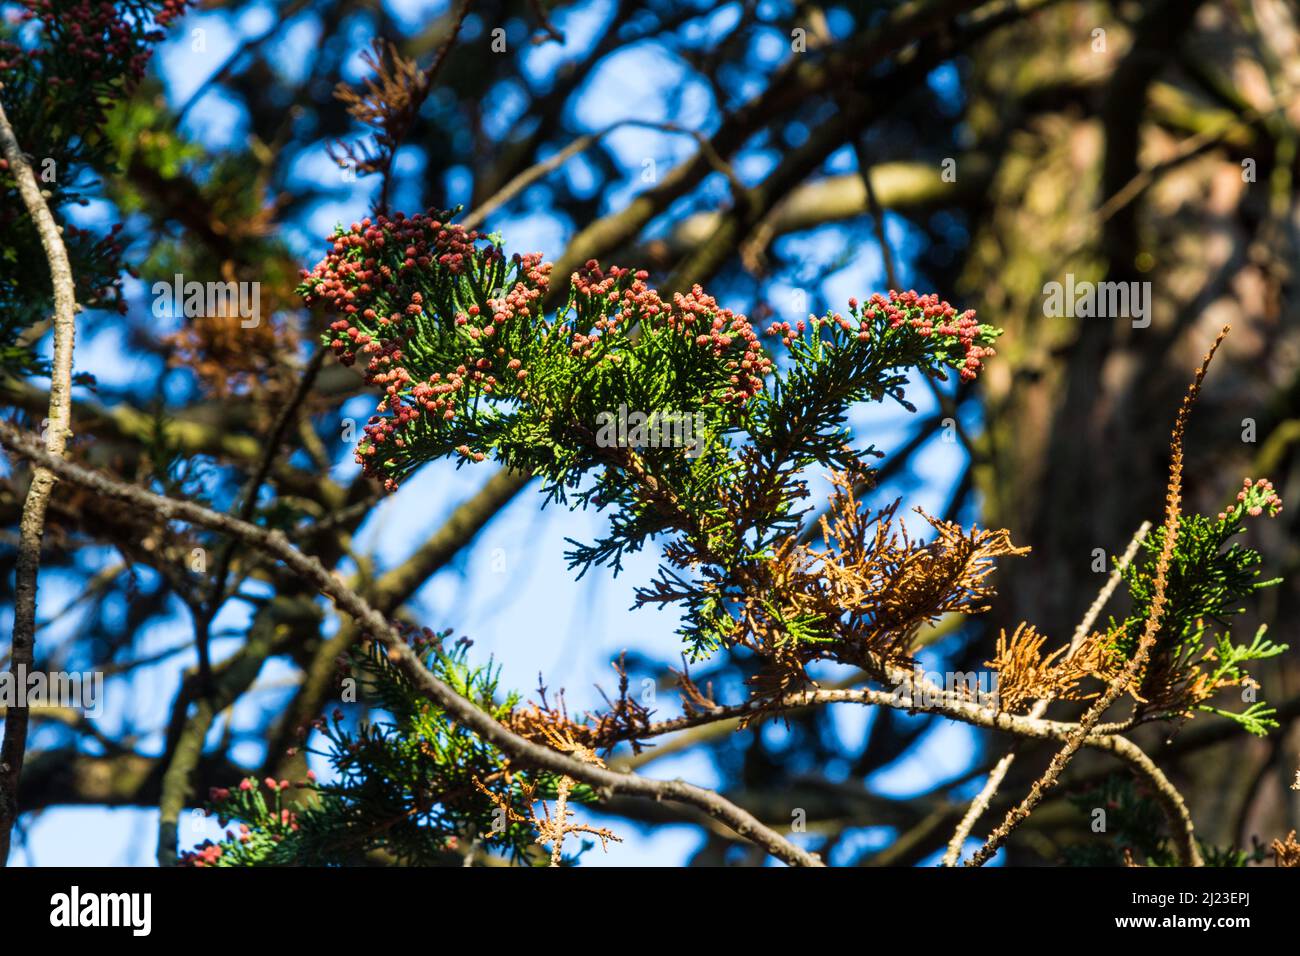 Red male cones in spring of Lawson cypress (Chamaecyparis lawsoniana) tree Stock Photo